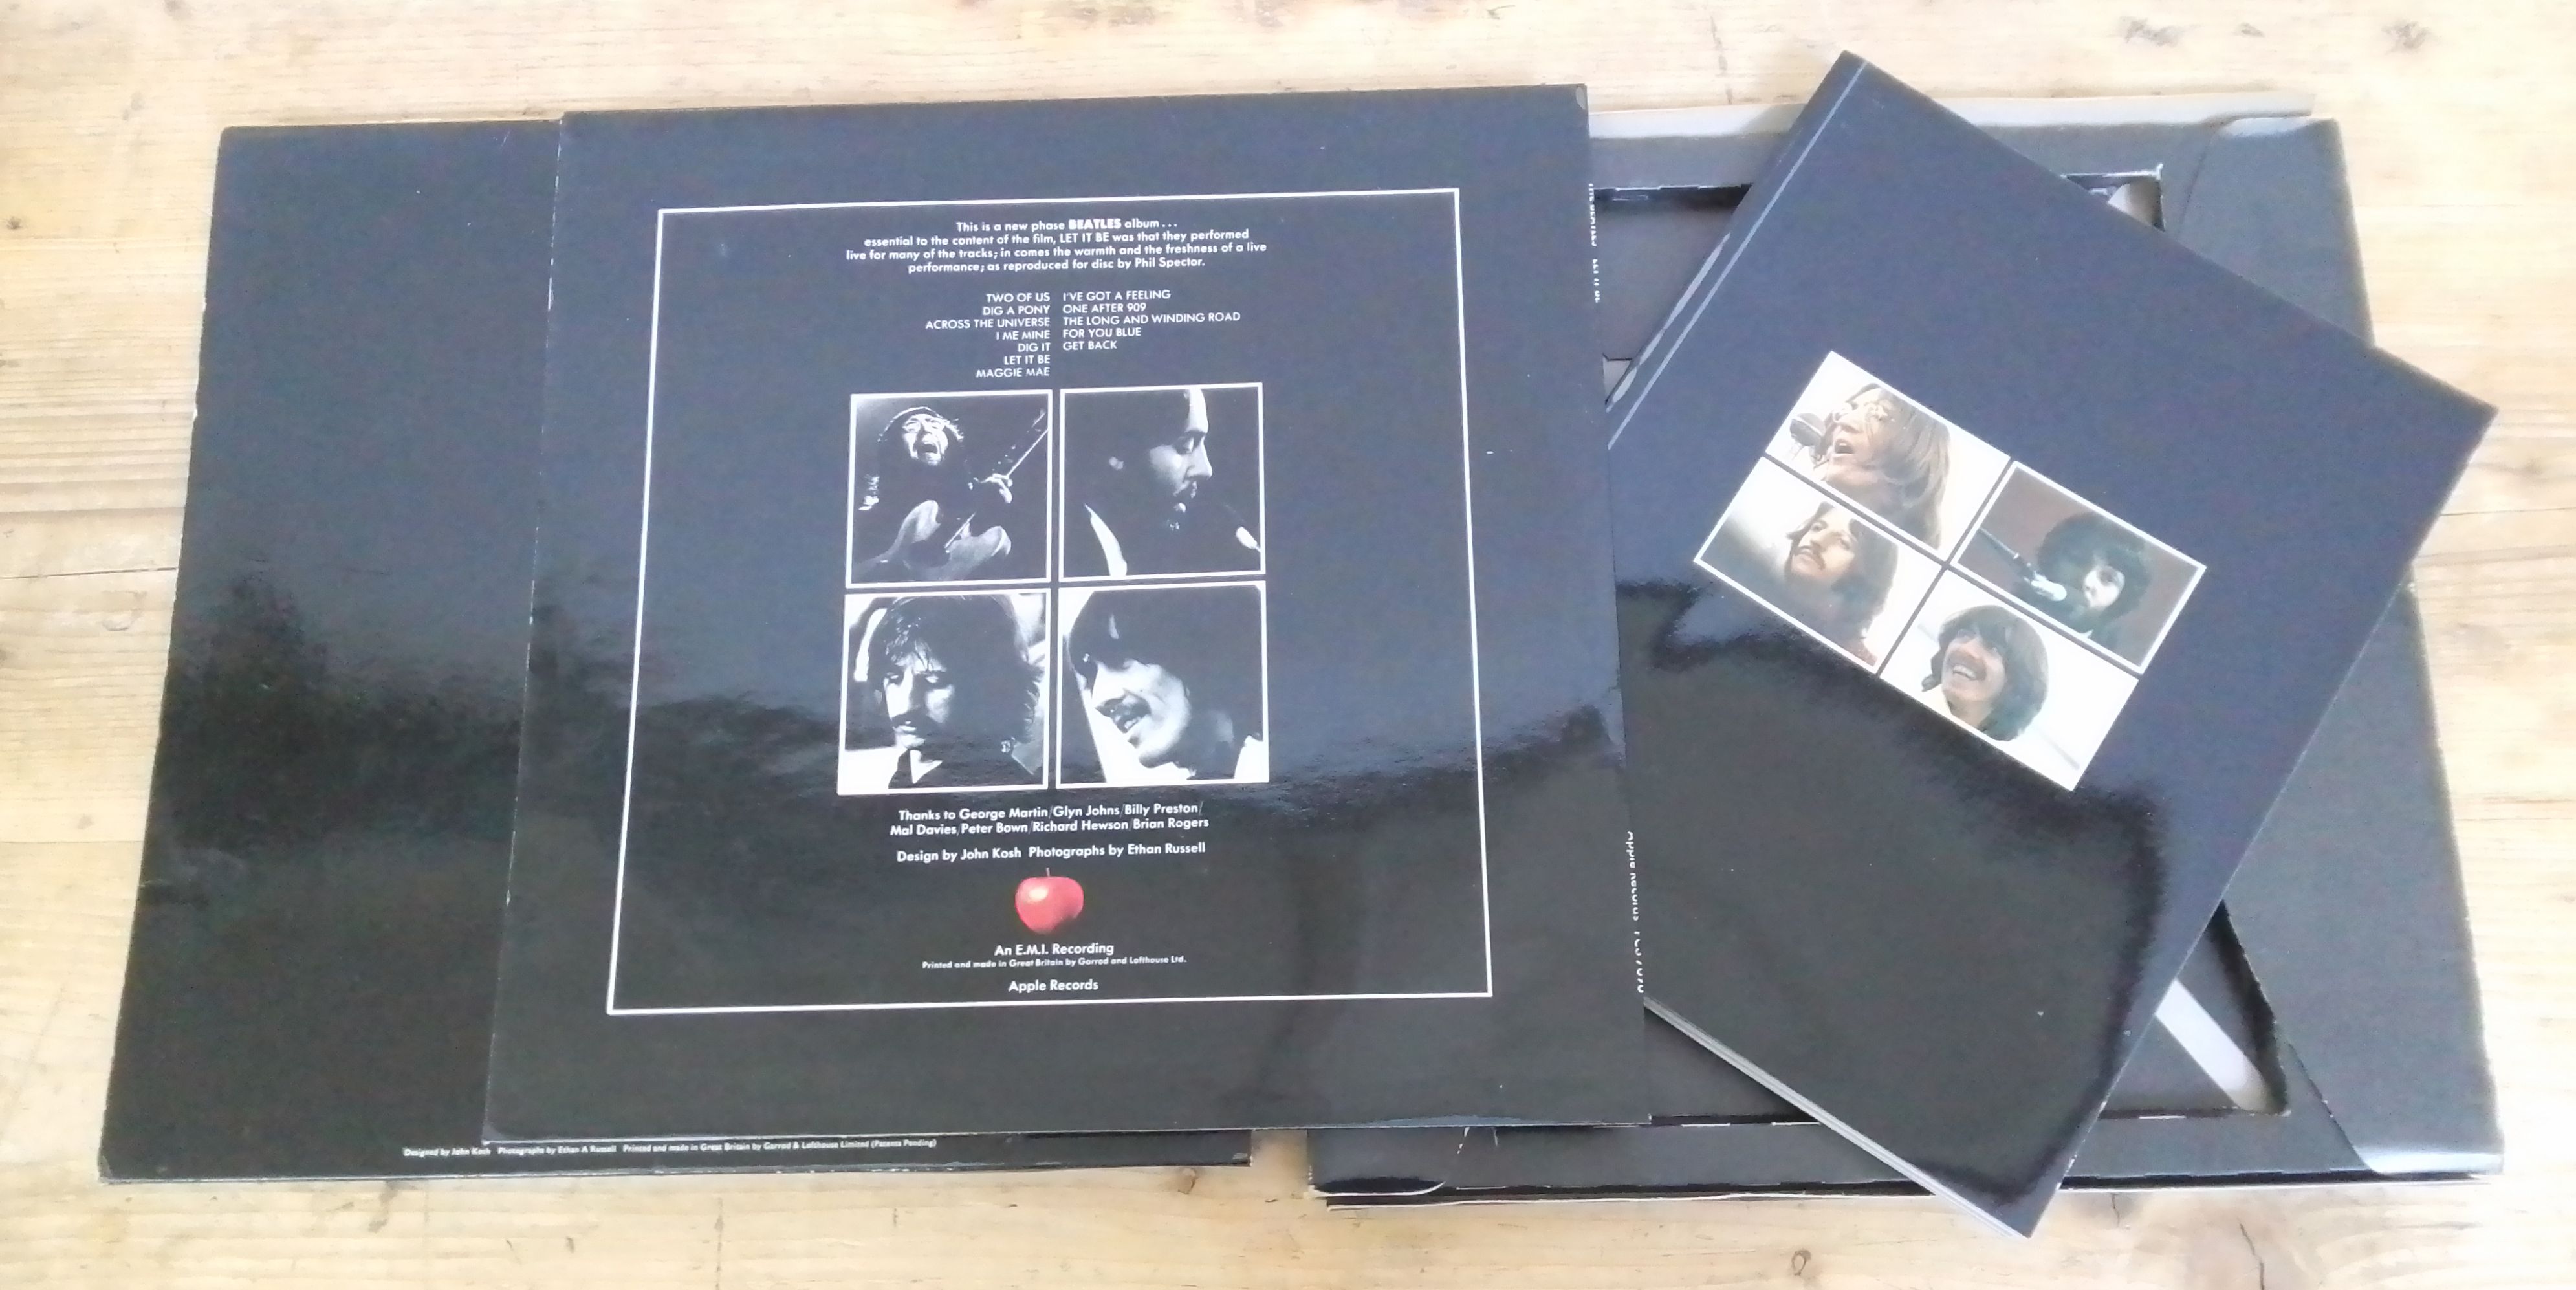 The Beatles - Let It Be, box set LP with booklet, Apple Records PXS 1 PCS 7096 - Image 2 of 4